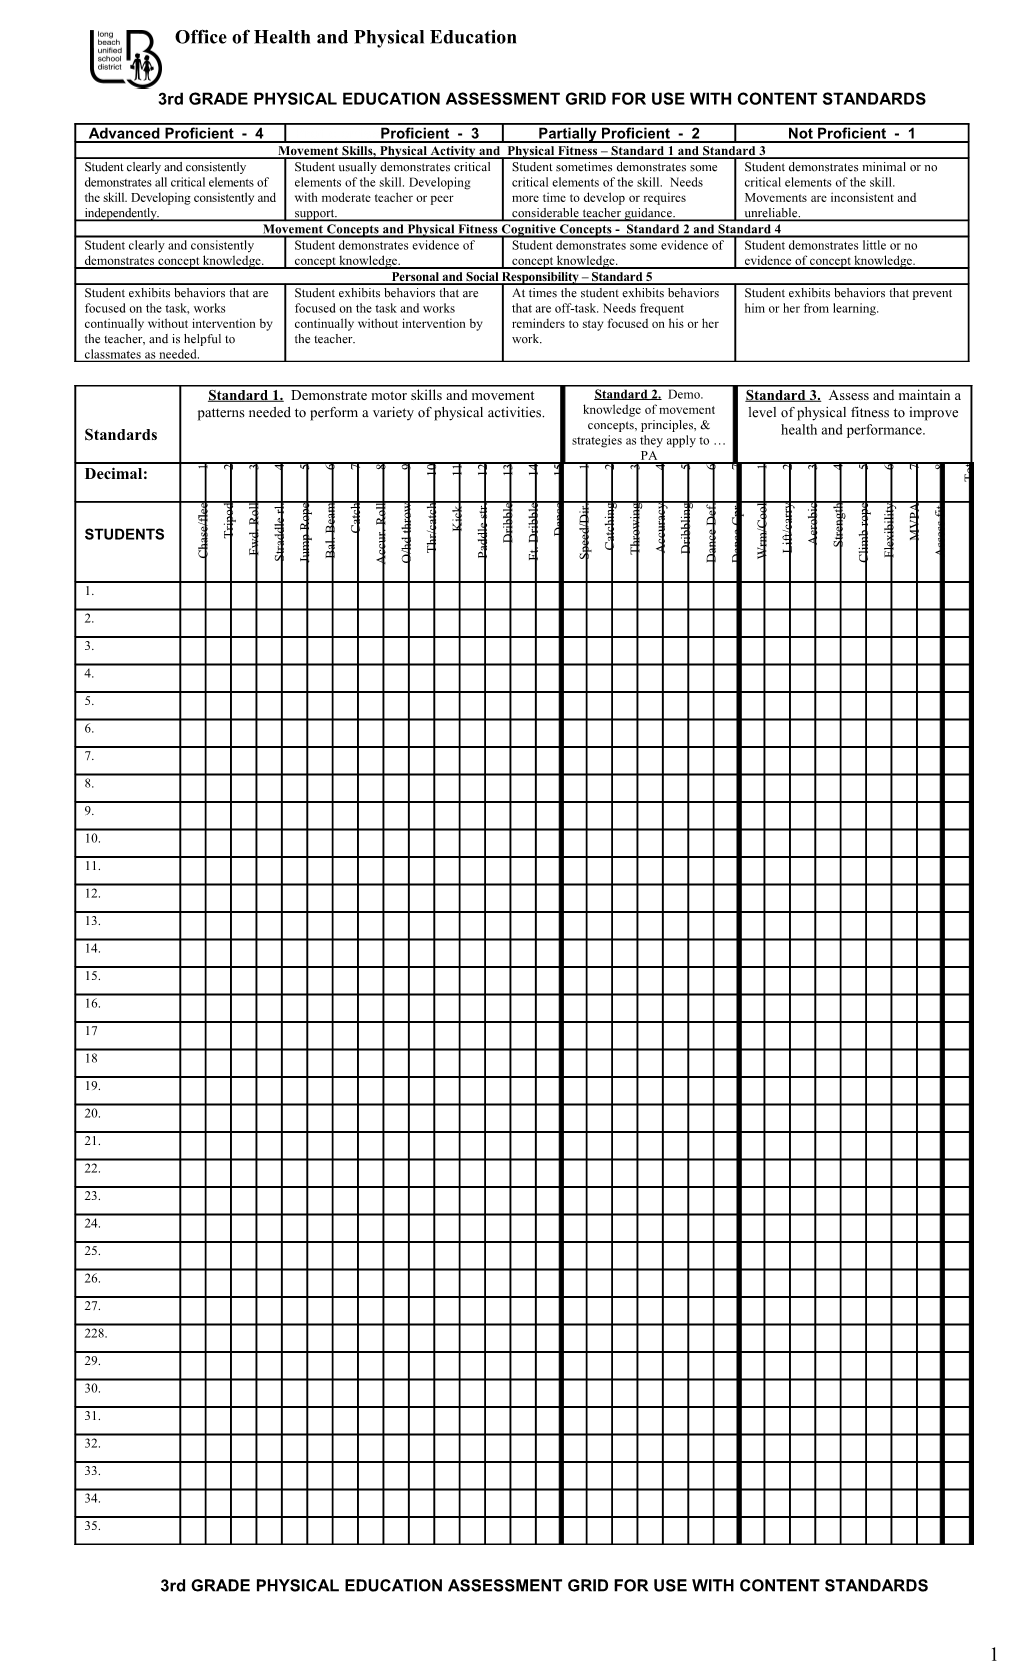 3Rd GRADE PHYSICAL EDUCATION ASSESSMENT GRID for USE with CONTENT STANDARDS